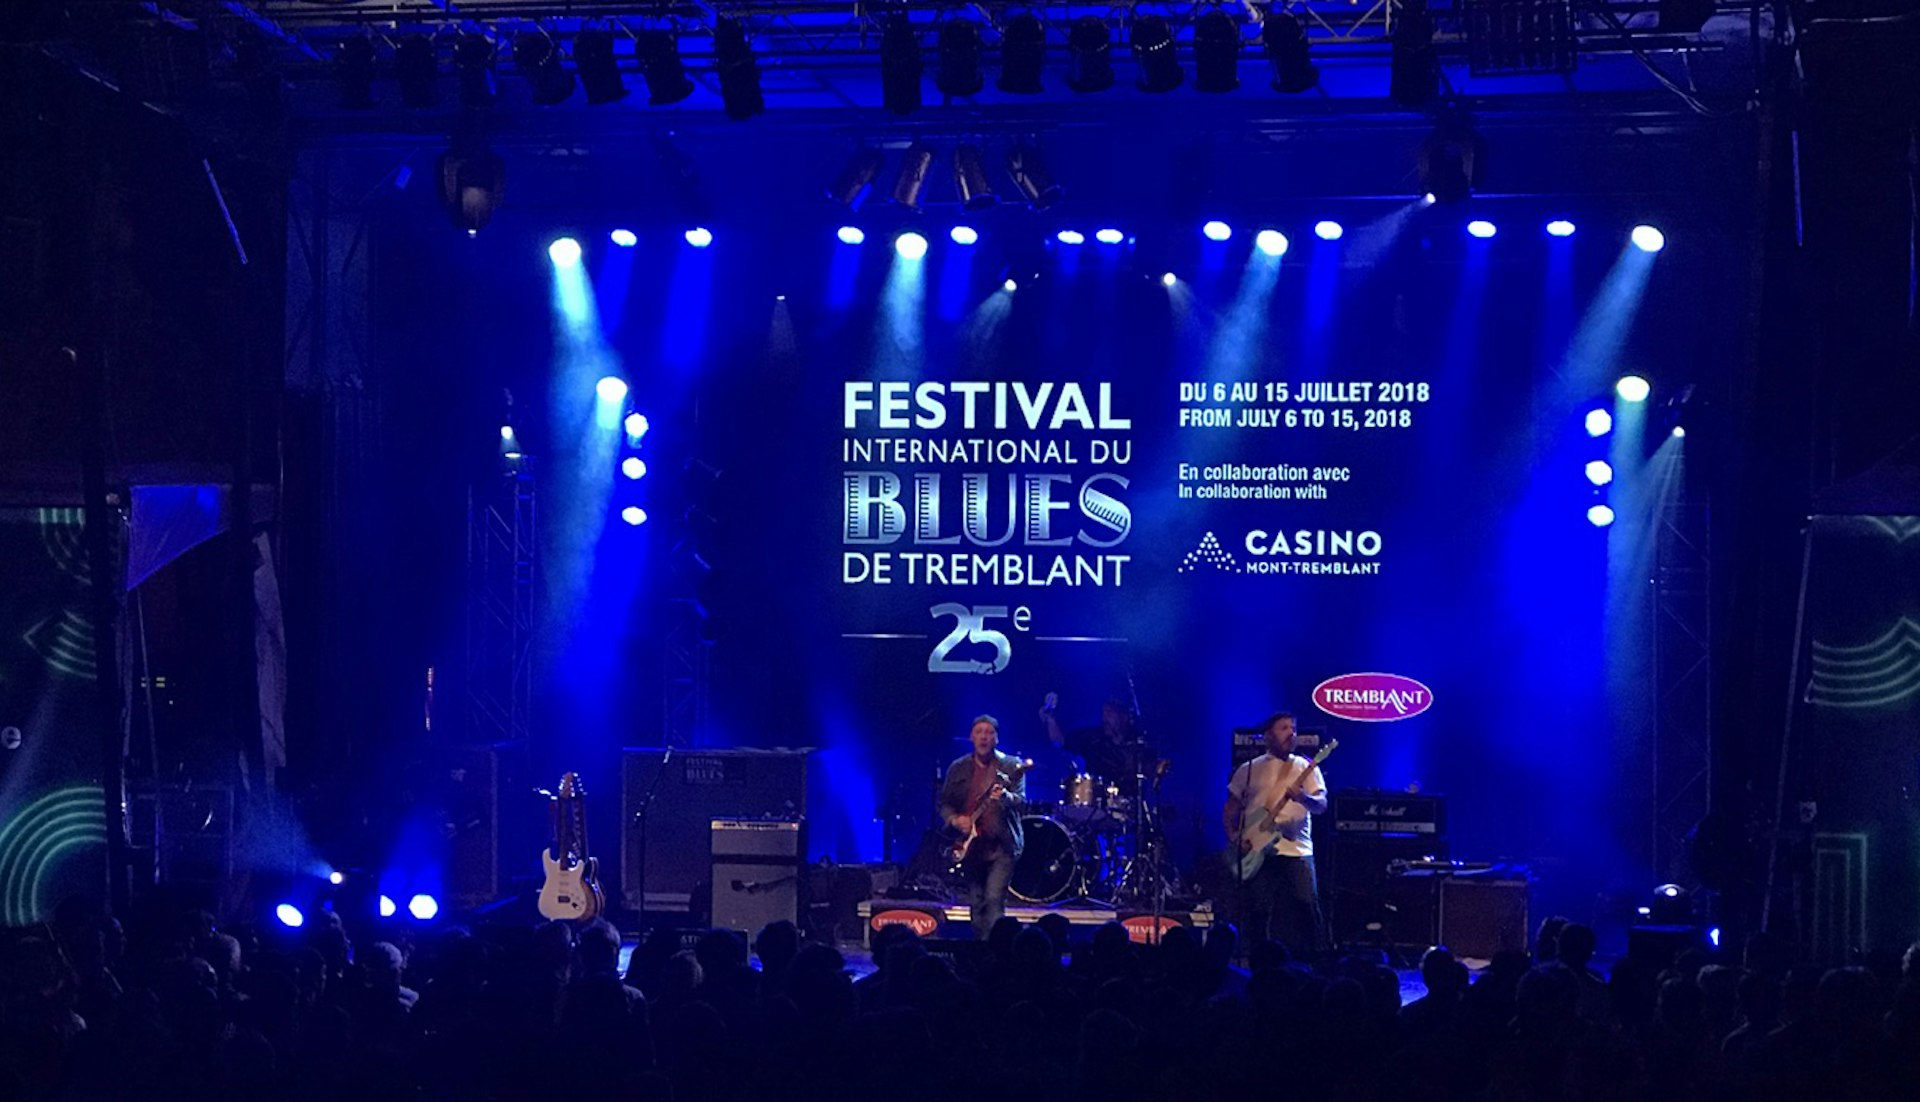 A band plays on an outdoor stage as blue lights illuminate a screen behind them that announces this is the Festival of Blues in Mont-Tremblant, Quebec.